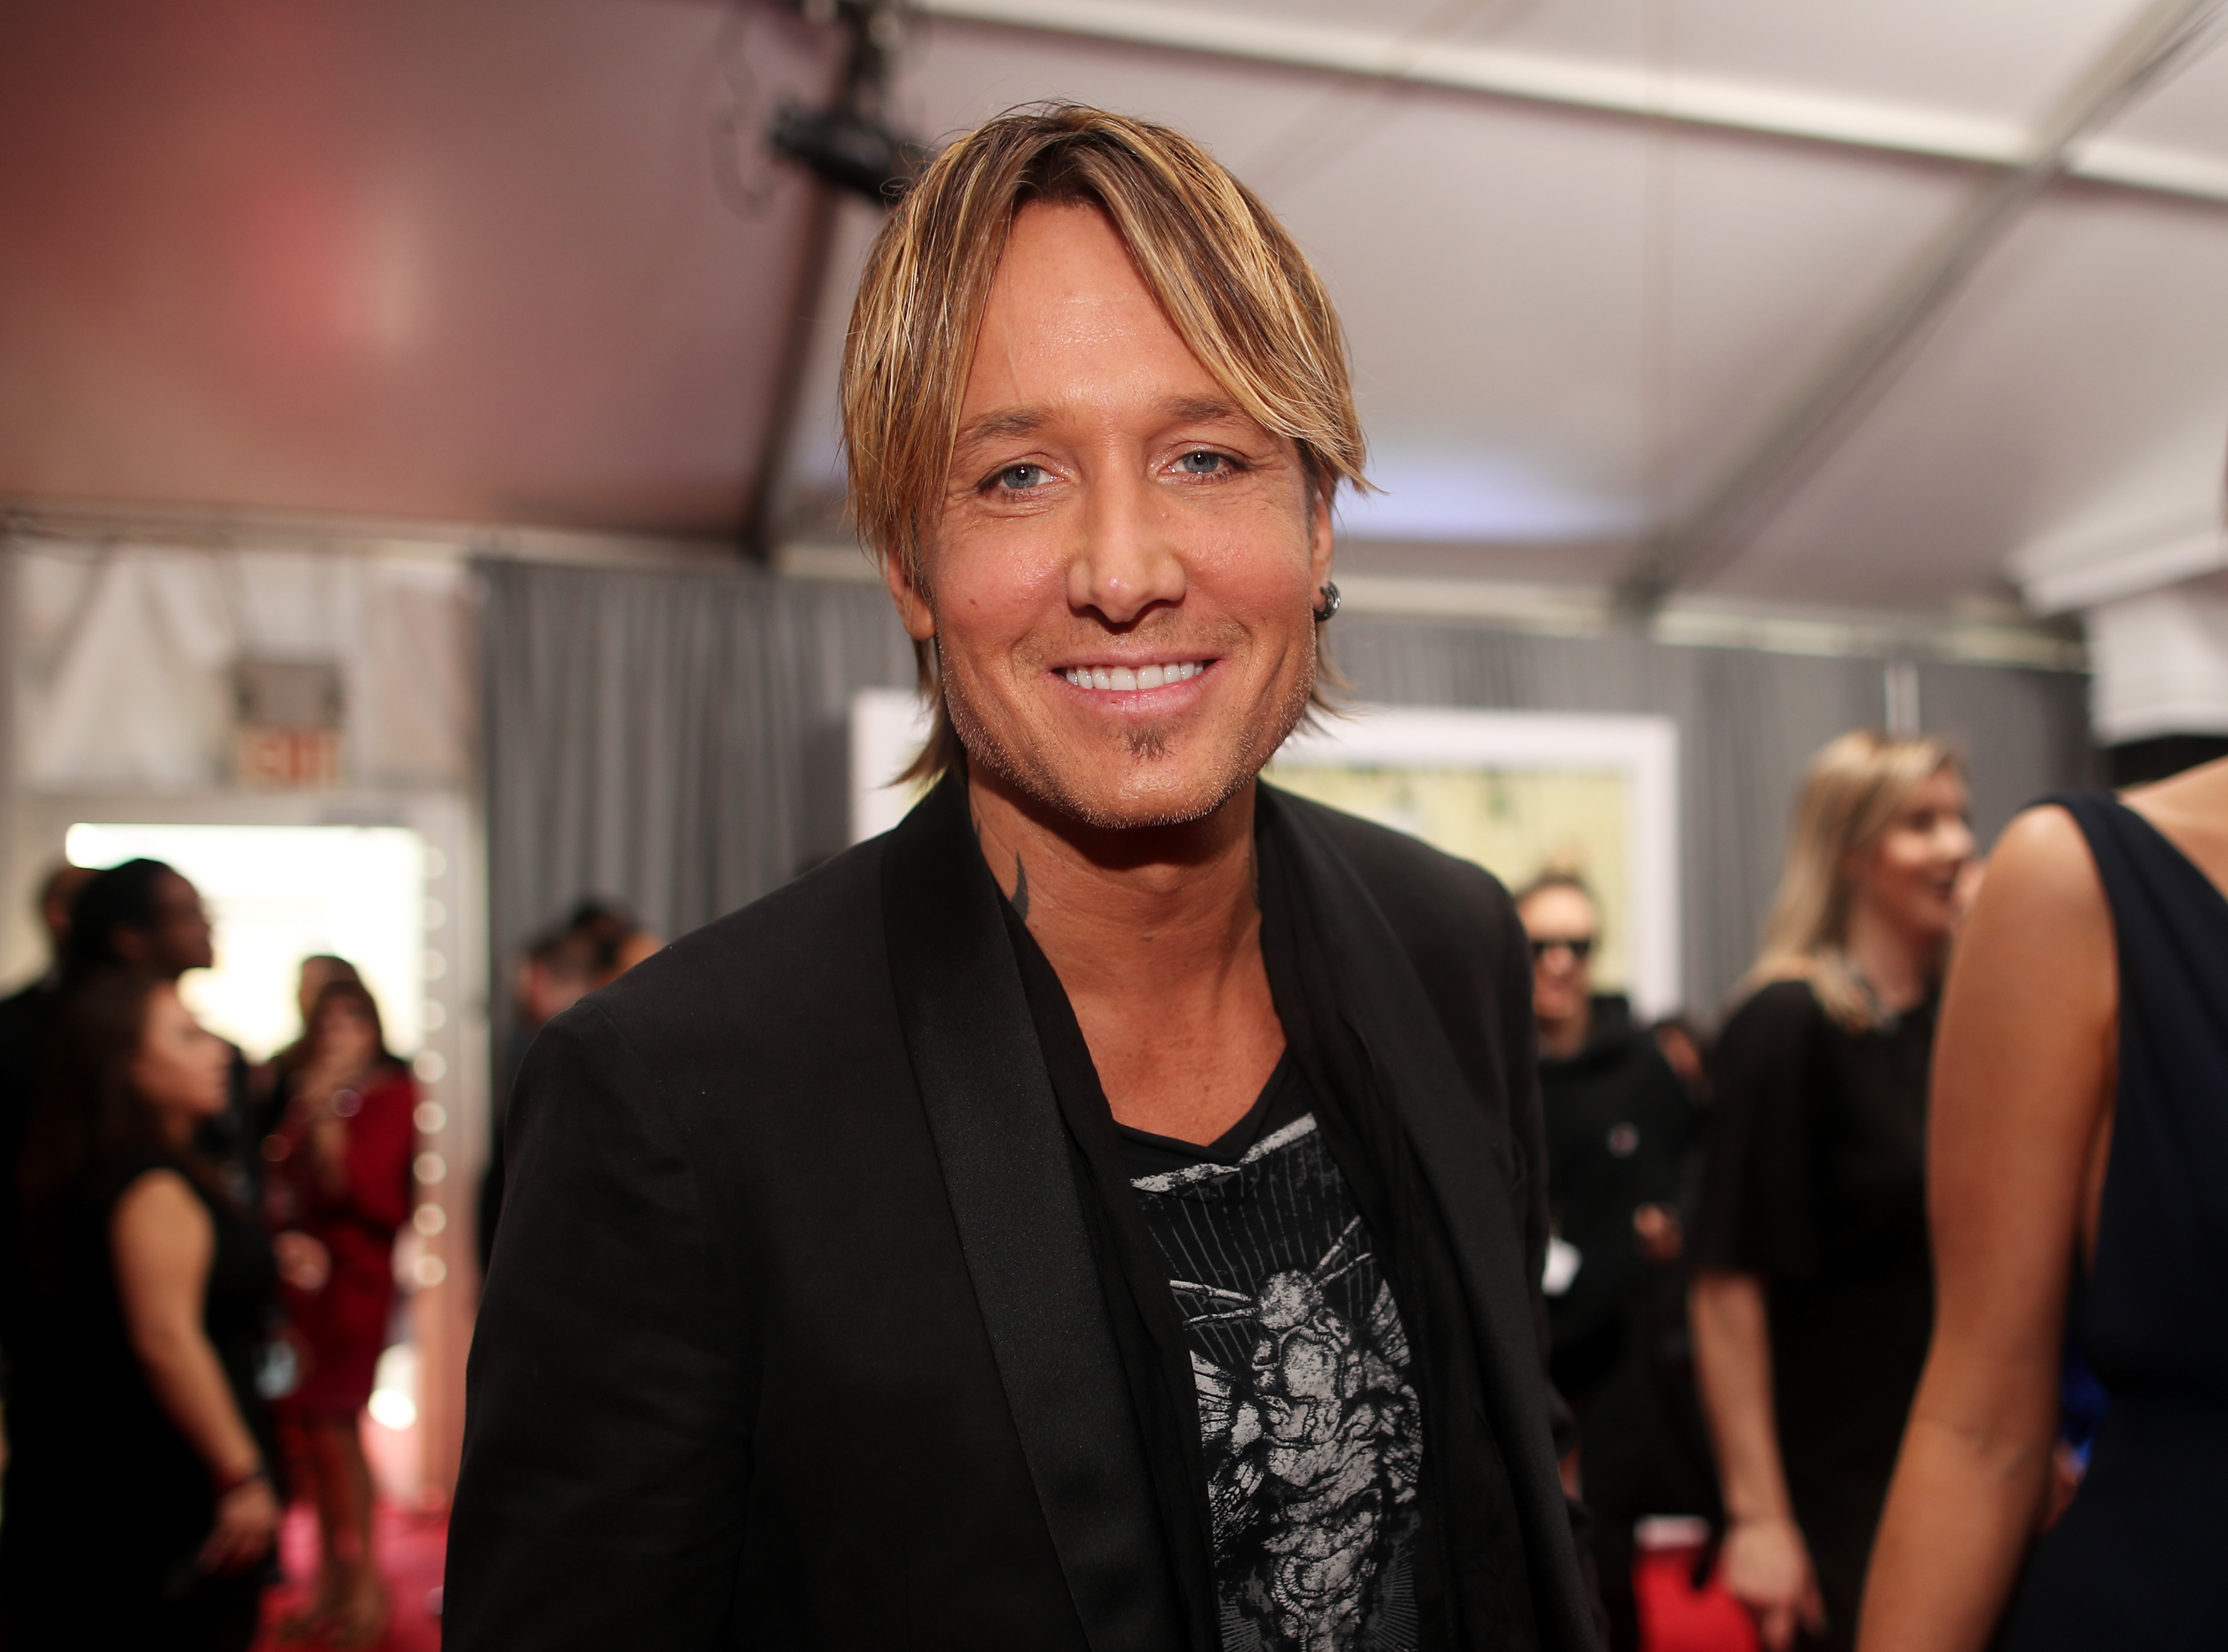 LOS ANGELES, CA - FEBRUARY 12: Musician Keith Urban attends The 59th GRAMMY Awards at STAPLES Center on February 12, 2017 in Los Angeles, California. Christopher Polk/Getty Images for NARAS/AFP